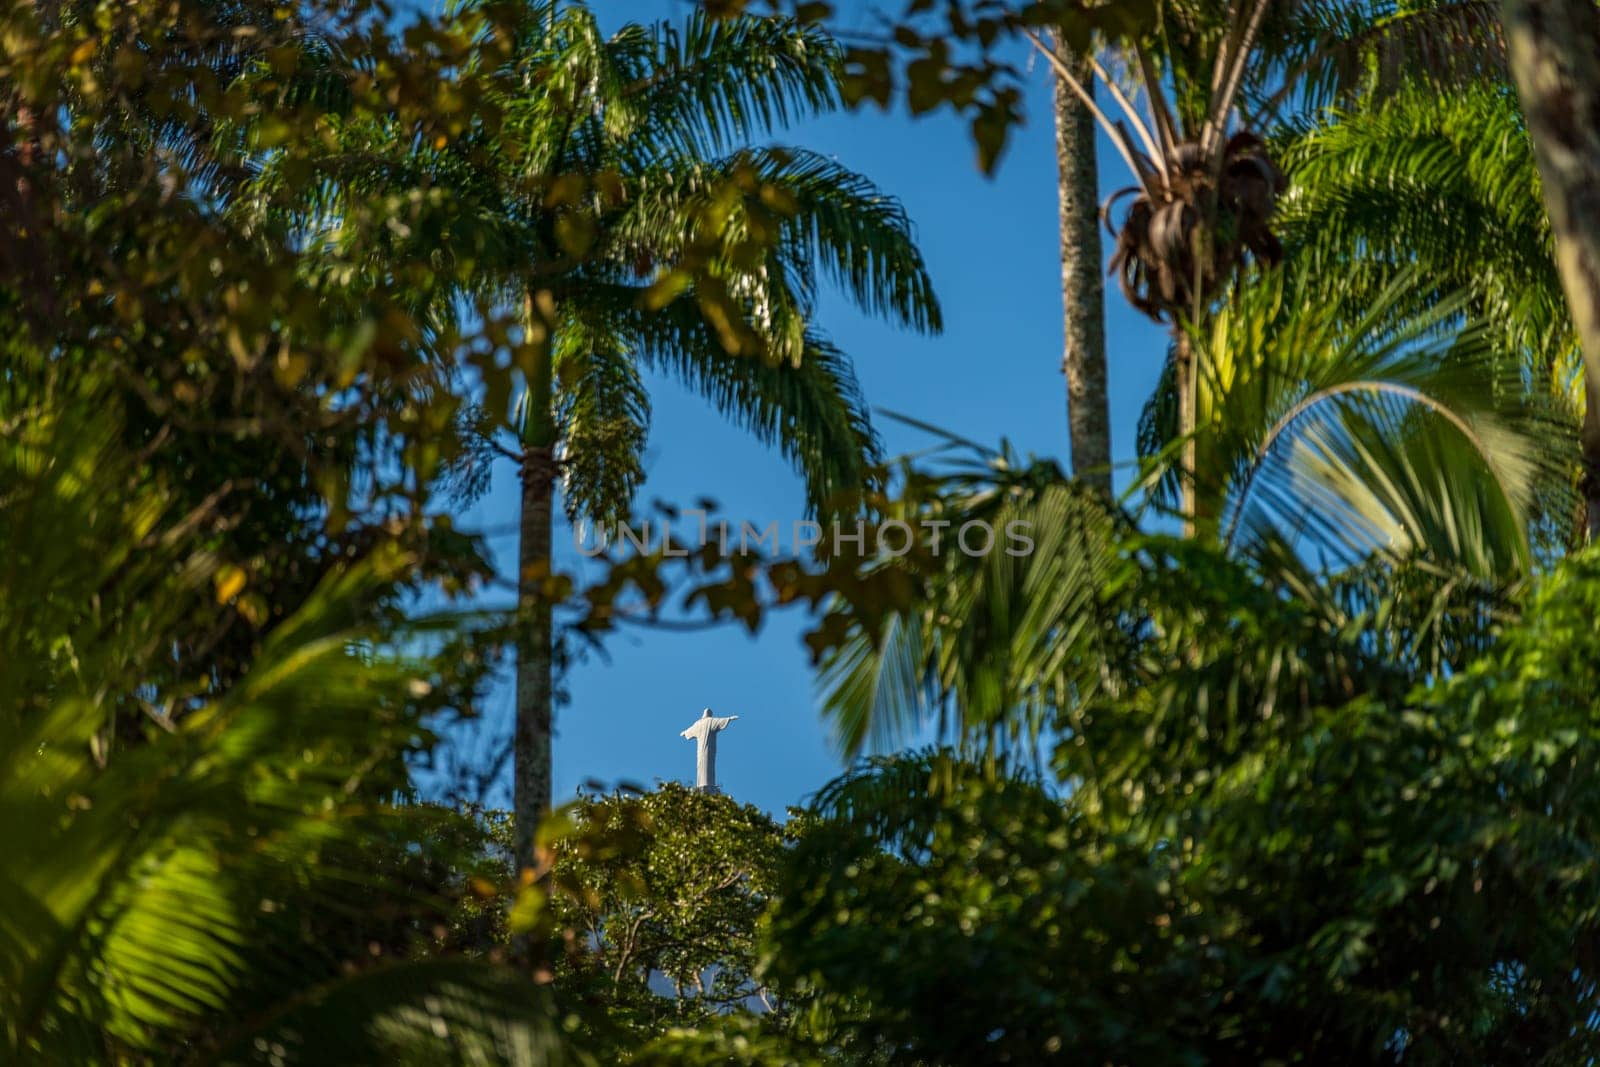 Iconic Statue Visible Through Lush Tropical Foliage by FerradalFCG